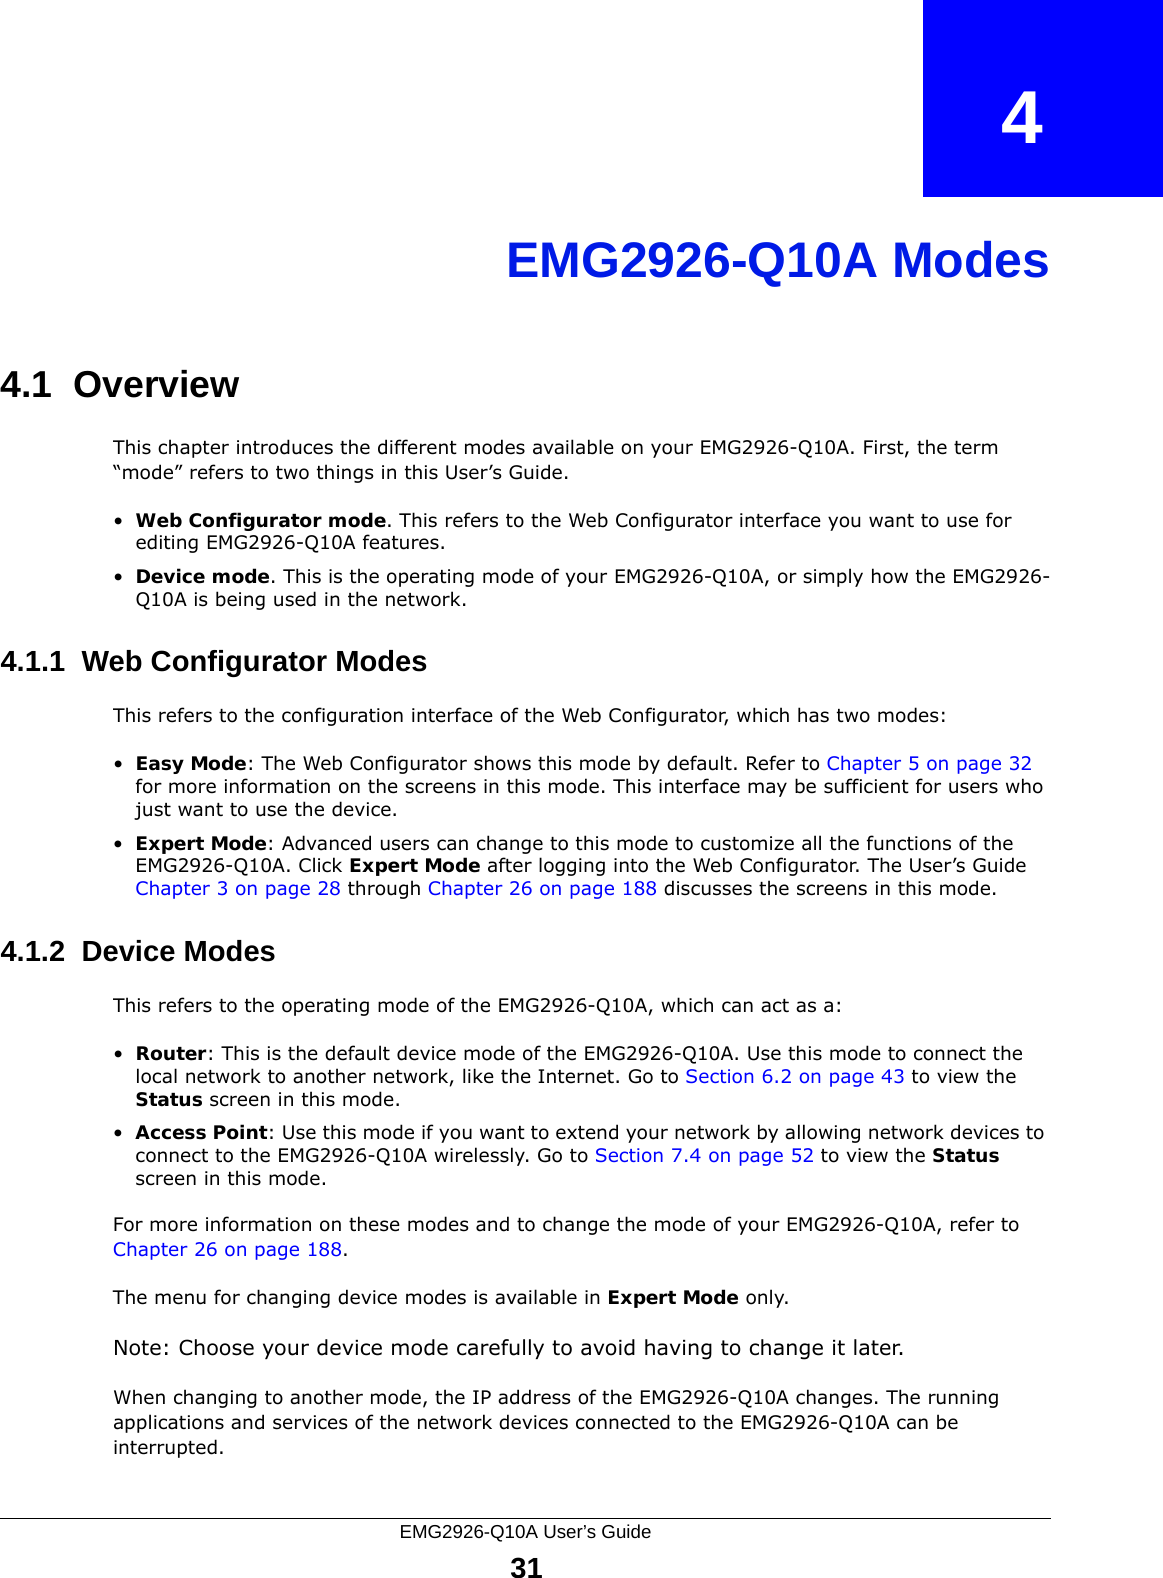 EMG2926-Q10A User’s Guide31CHAPTER   4EMG2926-Q10A Modes4.1  OverviewThis chapter introduces the different modes available on your EMG2926-Q10A. First, the term “mode” refers to two things in this User’s Guide.•Web Configurator mode. This refers to the Web Configurator interface you want to use for editing EMG2926-Q10A features. •Device mode. This is the operating mode of your EMG2926-Q10A, or simply how the EMG2926-Q10A is being used in the network. 4.1.1  Web Configurator ModesThis refers to the configuration interface of the Web Configurator, which has two modes:•Easy Mode: The Web Configurator shows this mode by default. Refer to Chapter 5 on page 32 for more information on the screens in this mode. This interface may be sufficient for users who just want to use the device.•Expert Mode: Advanced users can change to this mode to customize all the functions of the EMG2926-Q10A. Click Expert Mode after logging into the Web Configurator. The User’s Guide Chapter 3 on page 28 through Chapter 26 on page 188 discusses the screens in this mode.4.1.2  Device ModesThis refers to the operating mode of the EMG2926-Q10A, which can act as a:•Router: This is the default device mode of the EMG2926-Q10A. Use this mode to connect the local network to another network, like the Internet. Go to Section 6.2 on page 43 to view the Status screen in this mode.•Access Point: Use this mode if you want to extend your network by allowing network devices to connect to the EMG2926-Q10A wirelessly. Go to Section 7.4 on page 52 to view the Status screen in this mode.For more information on these modes and to change the mode of your EMG2926-Q10A, refer to Chapter 26 on page 188.The menu for changing device modes is available in Expert Mode only. Note: Choose your device mode carefully to avoid having to change it later.When changing to another mode, the IP address of the EMG2926-Q10A changes. The running applications and services of the network devices connected to the EMG2926-Q10A can be interrupted. 